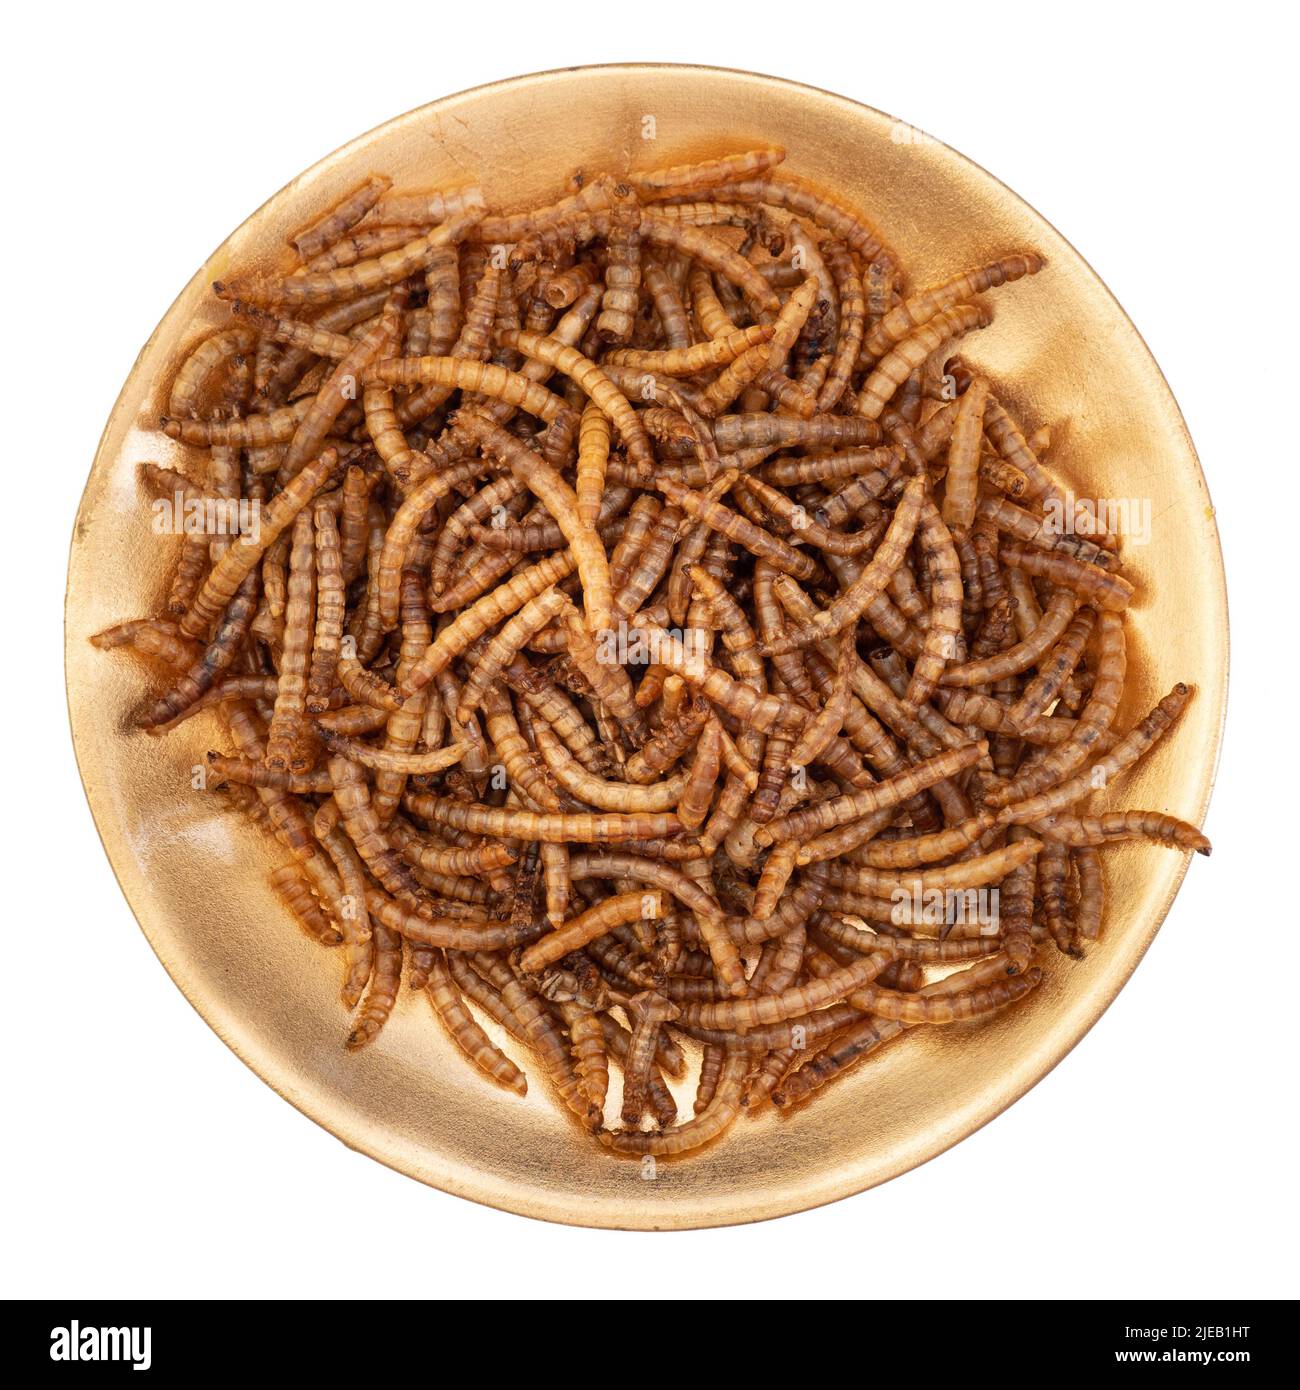 Mealworms in gold rustic bowl isolated on white. Stock Photo